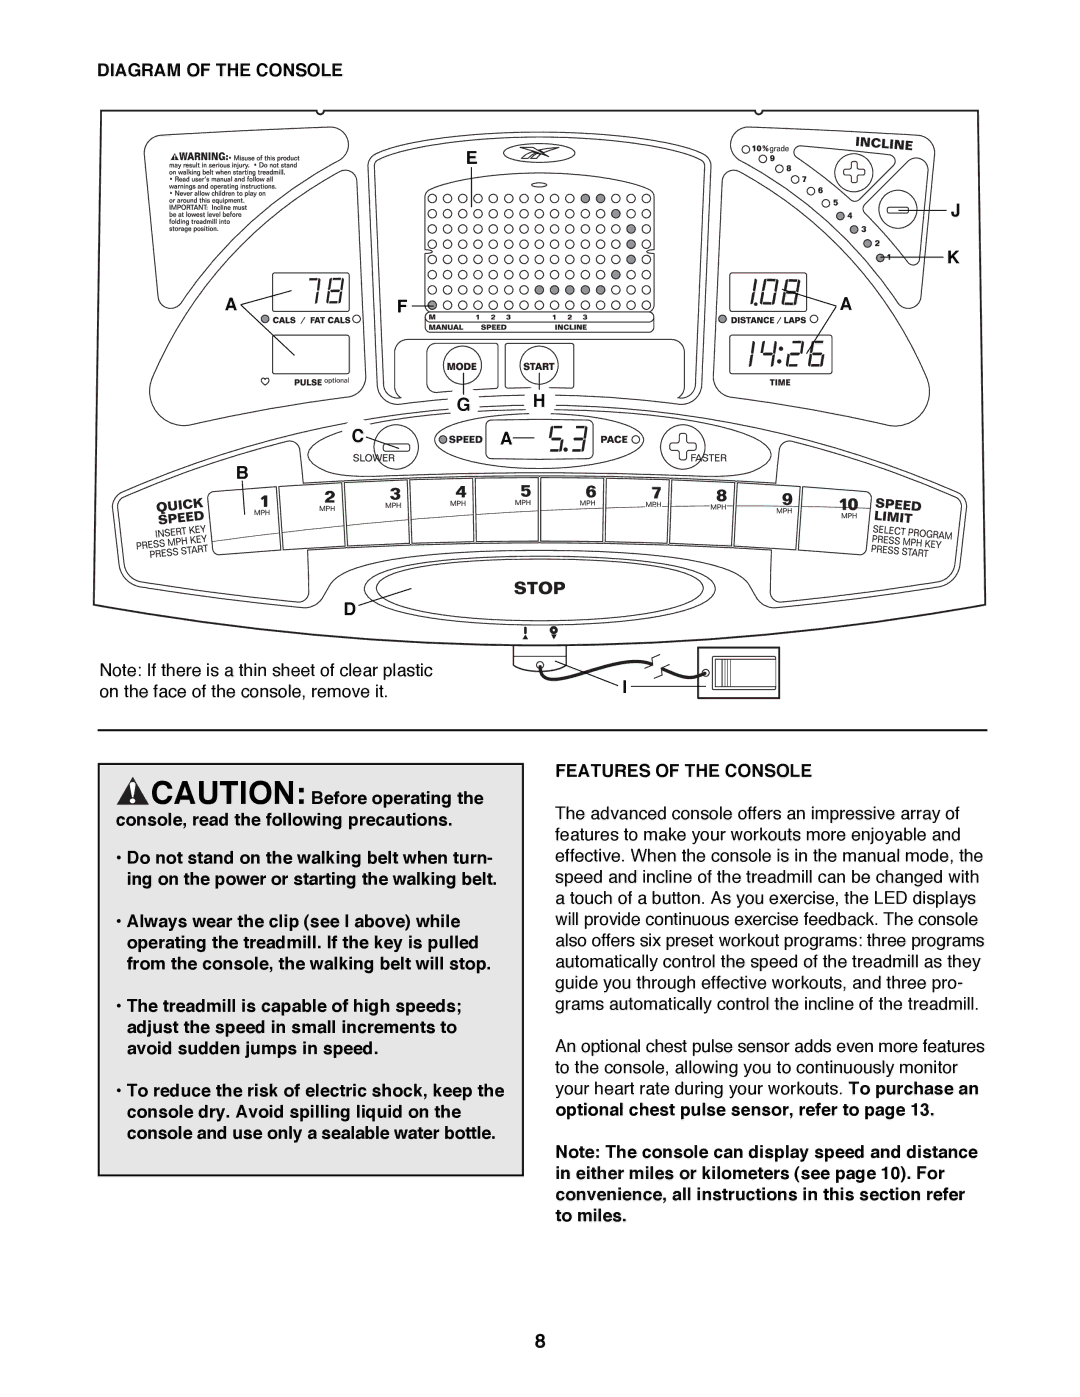 Reebok Fitness RBTL11980 manual Diagram of the Console, Features of the Console 